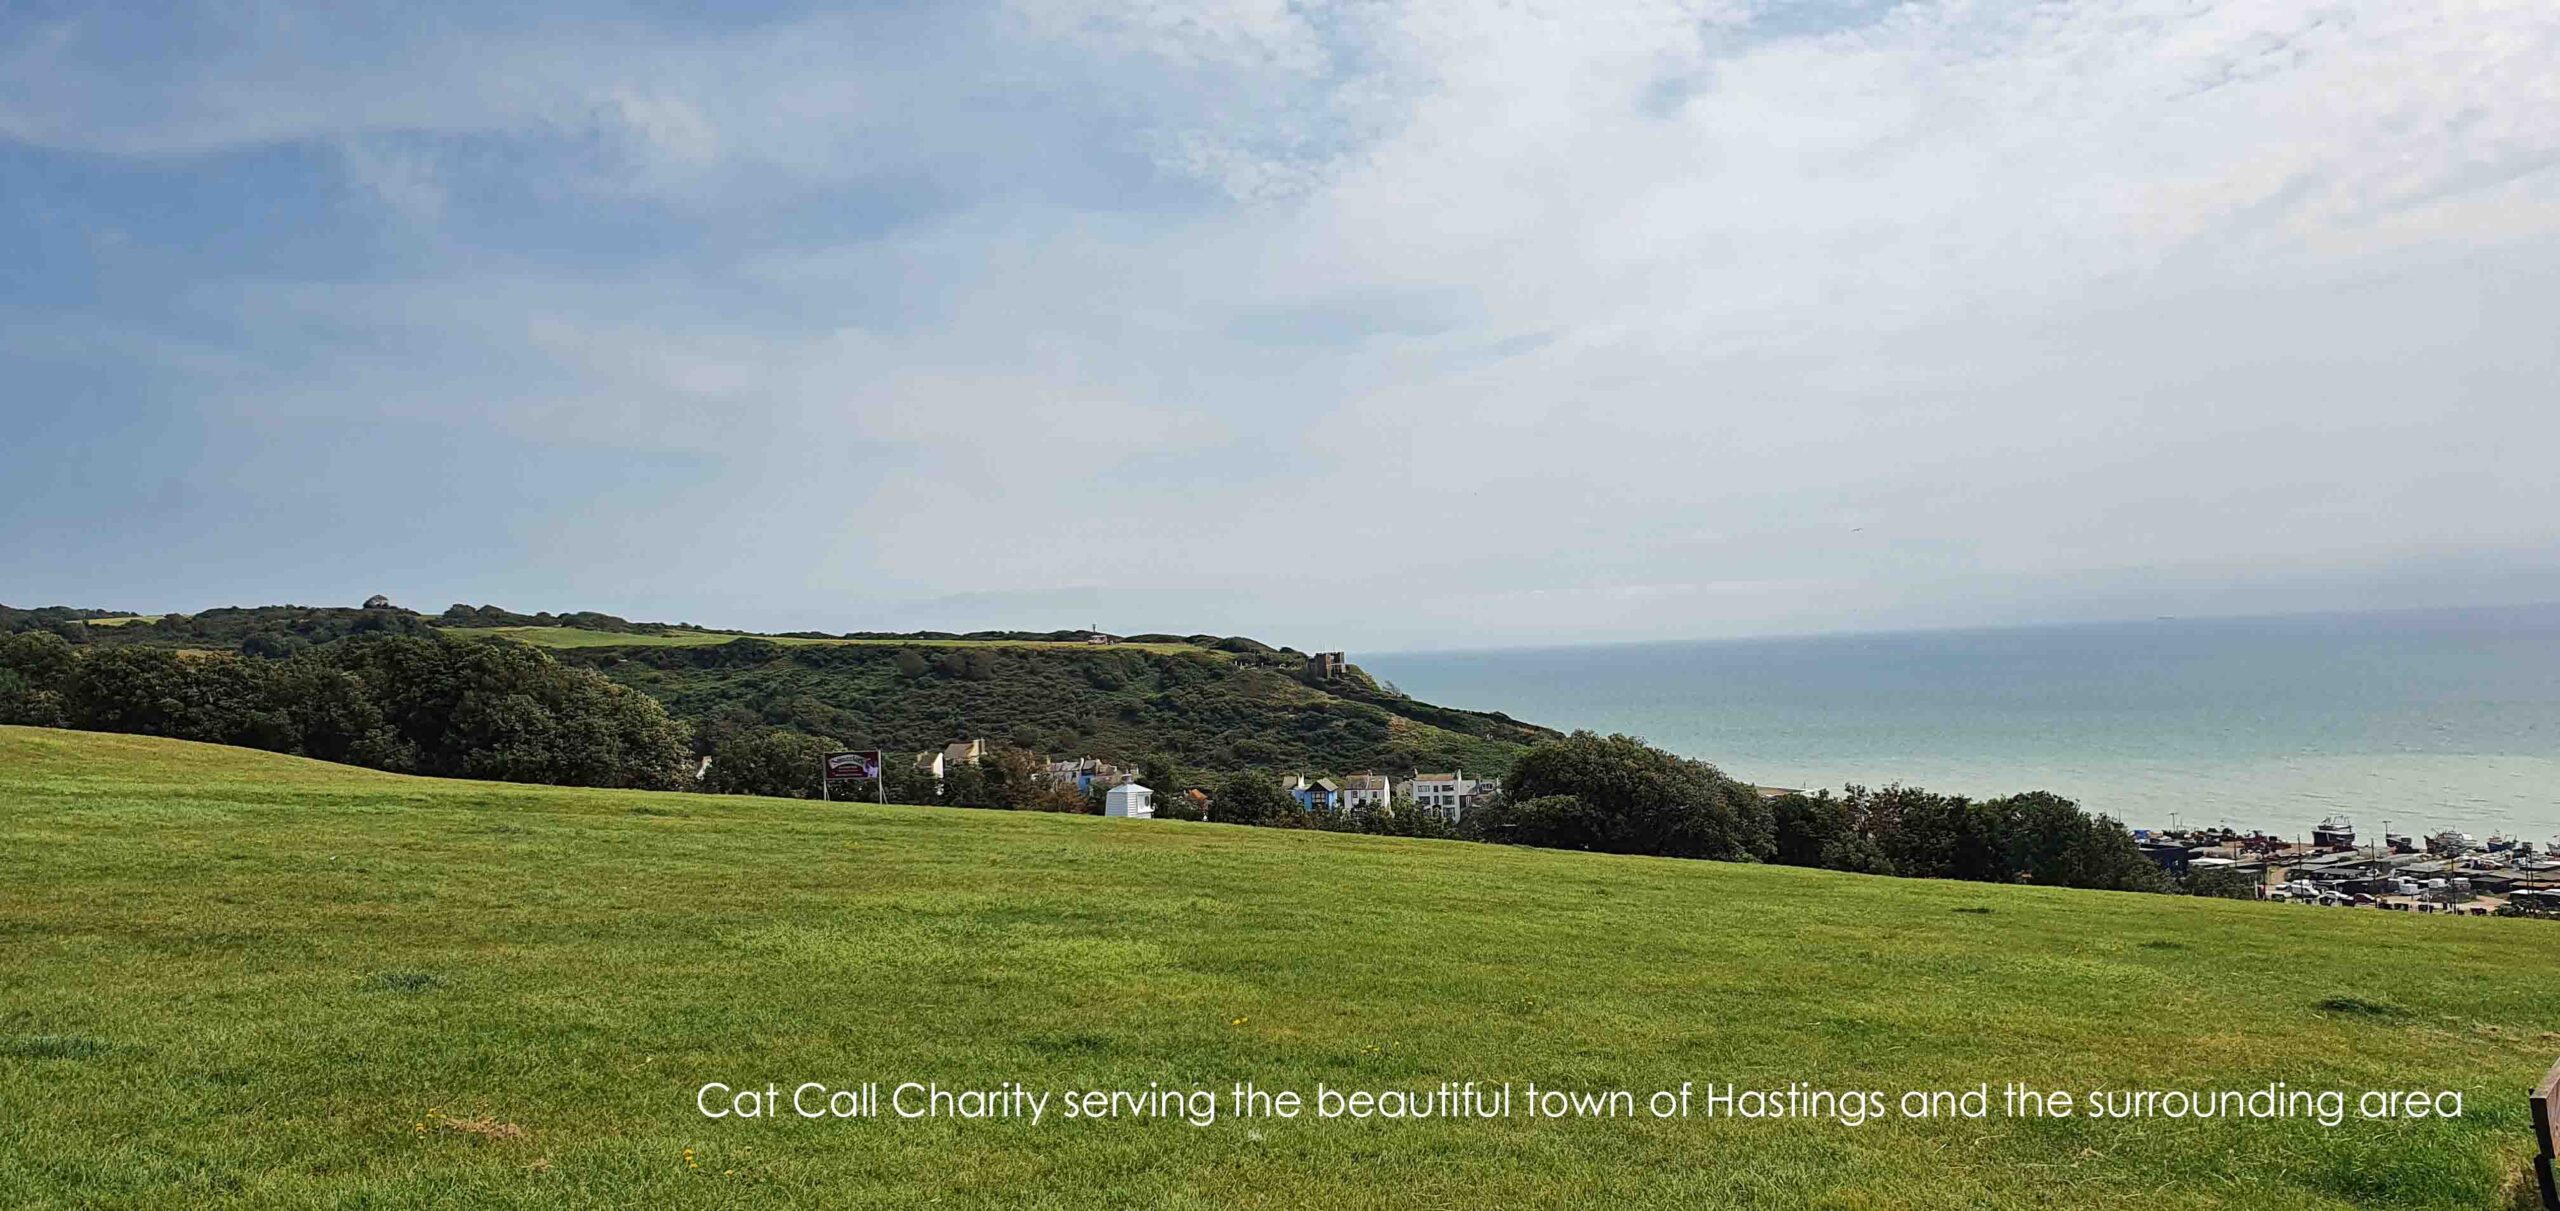 Cat Call charity in Hastings by the sea